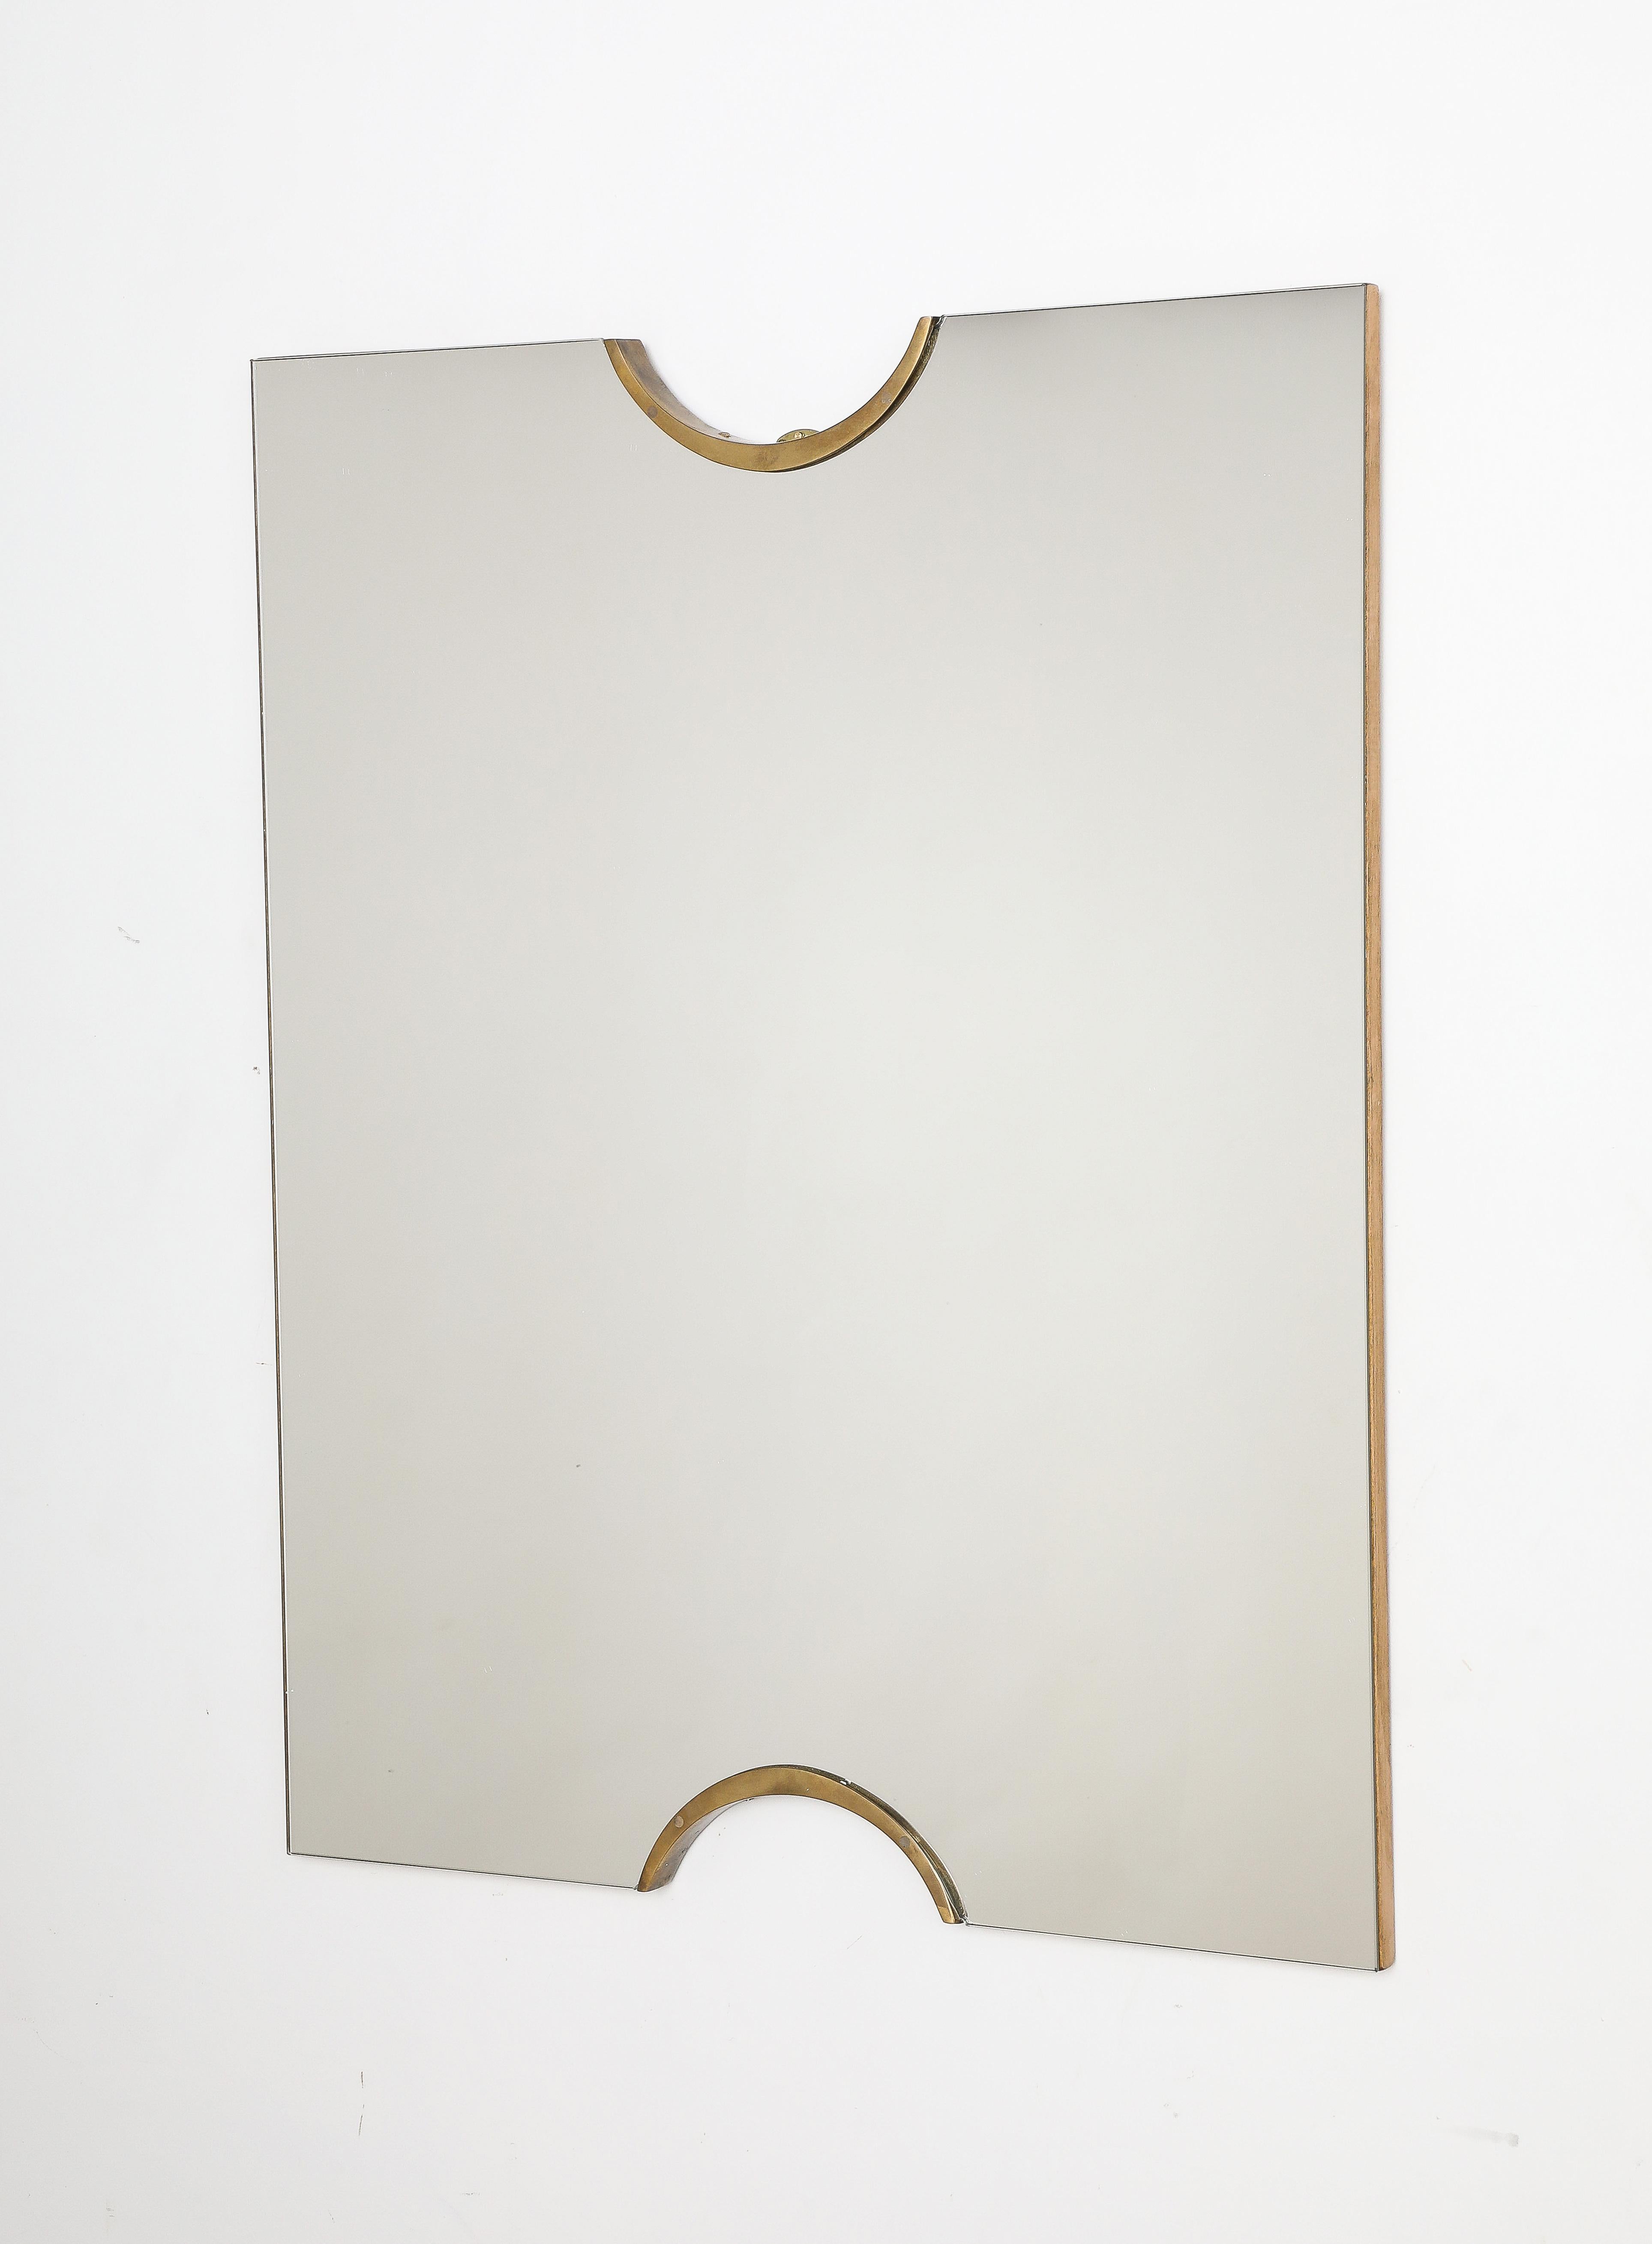 Pair of Italian Modernist Glass and Brass Wall Mirrors, circa 1970  9